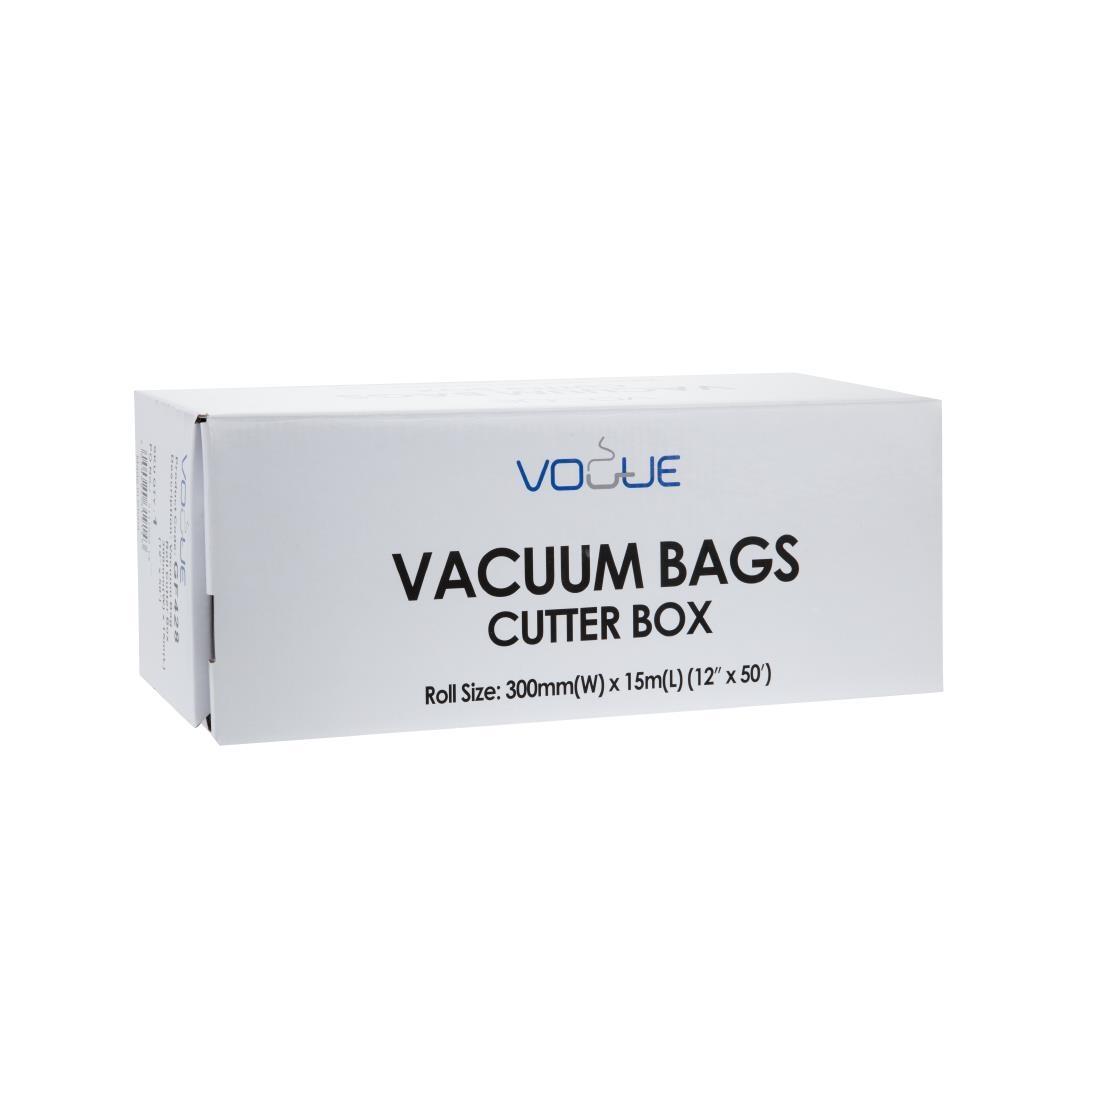 Vogue Vacuum Pack Roll with Cutter Box 300mm - GF428  - 1